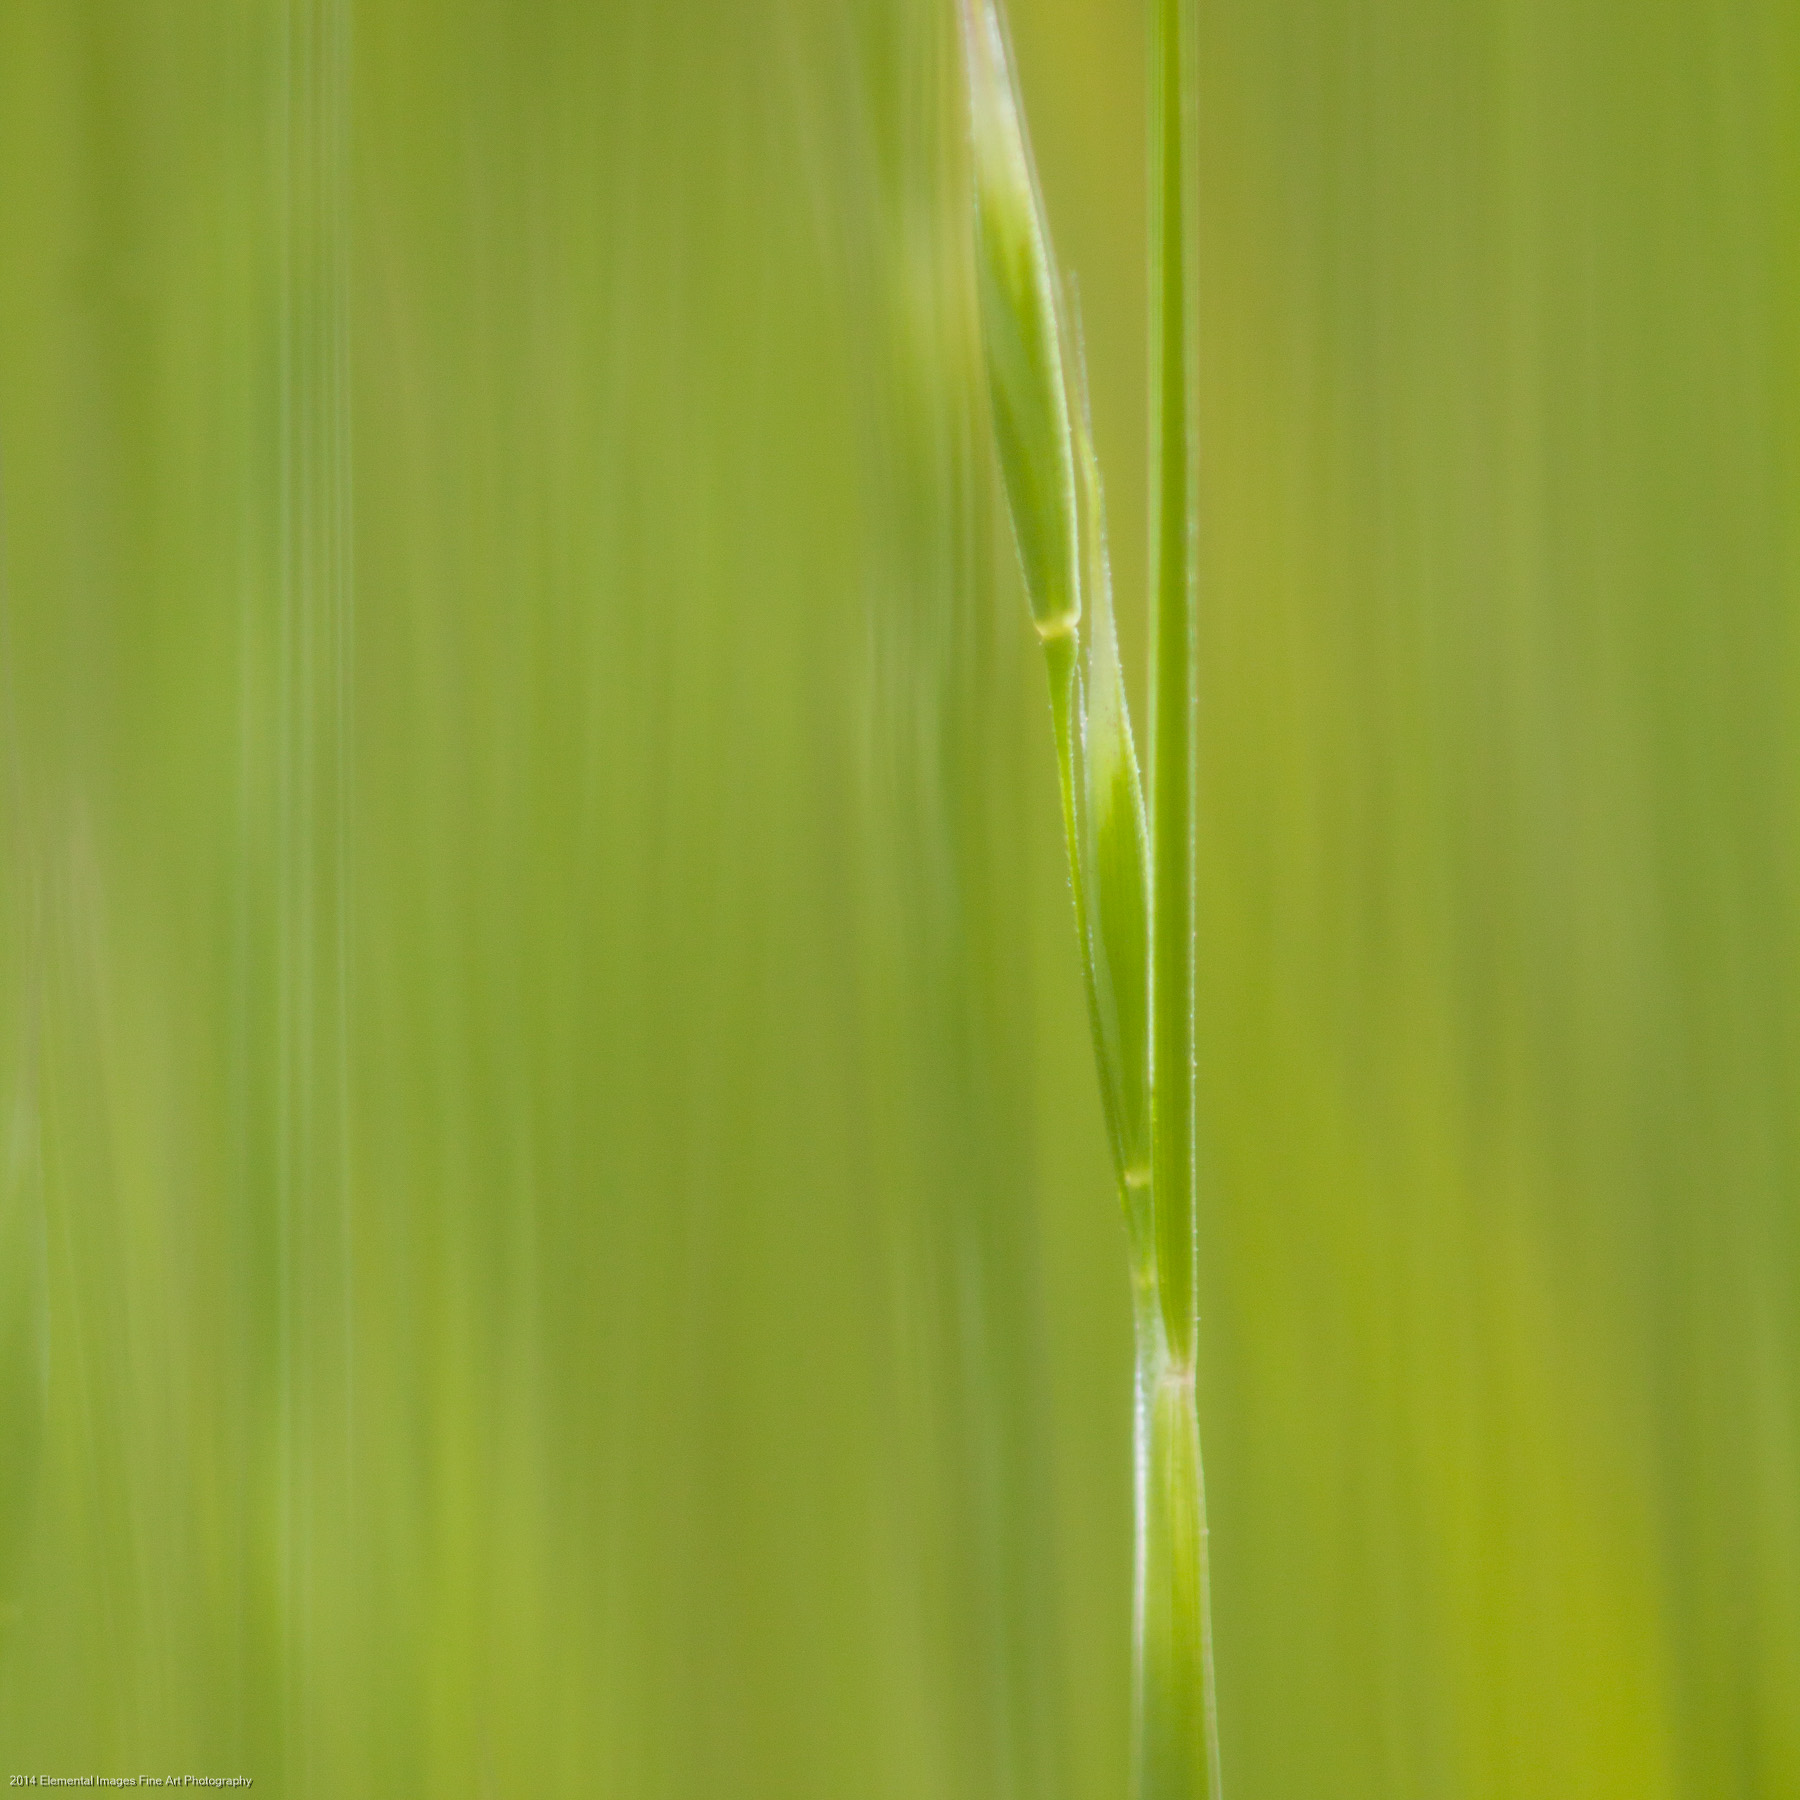 Grasses CXXXIII | The Palouse | WA | USA - © 2014 Elemental Images Fine Art Photography - All Rights Reserved Worldwide